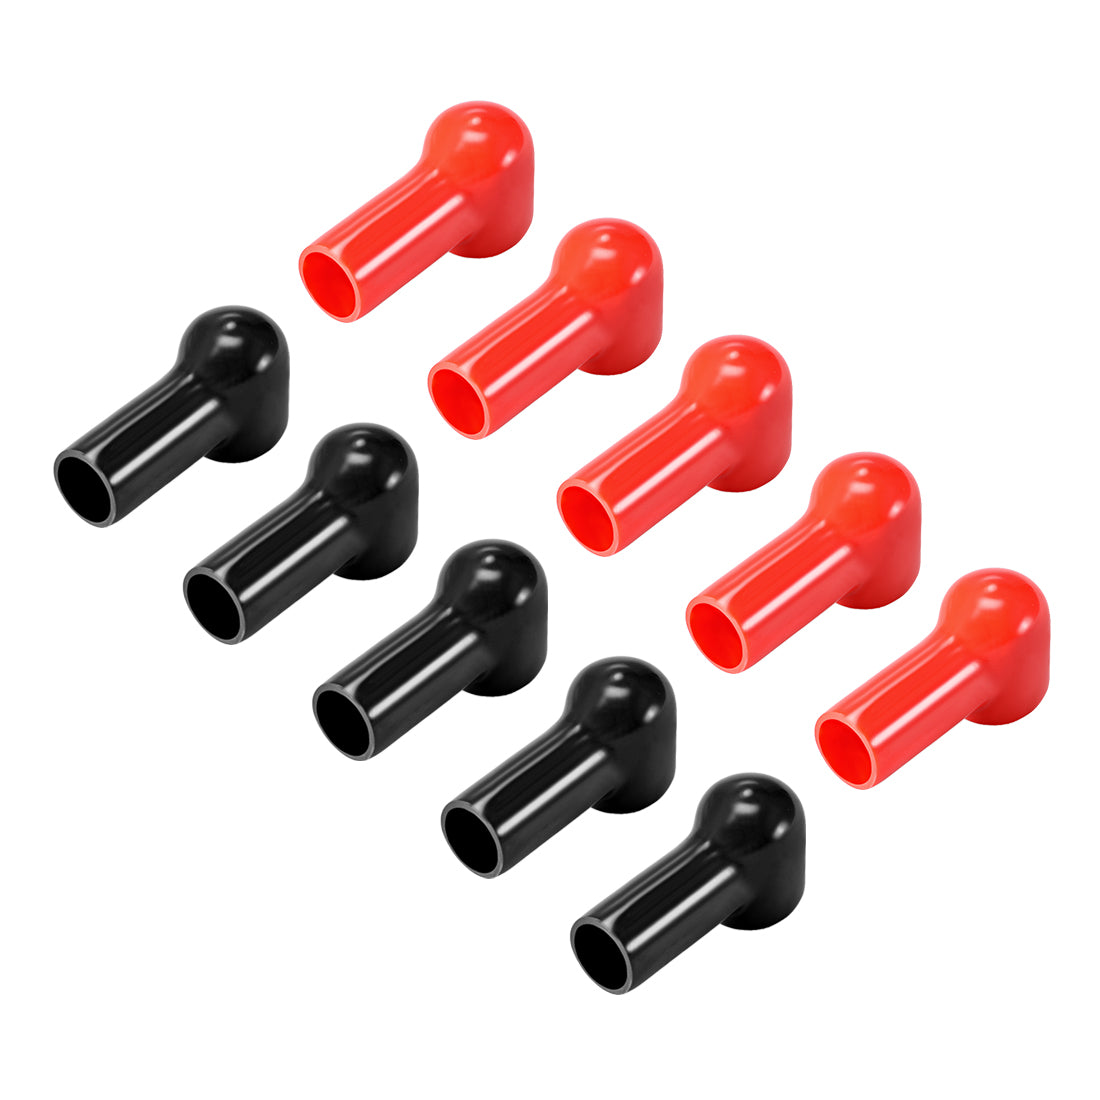 uxcell Uxcell Battery Terminal Insulating Rubber Protector Covers for 16mm Terminal 12mm Cable Red Black 5 Pairs